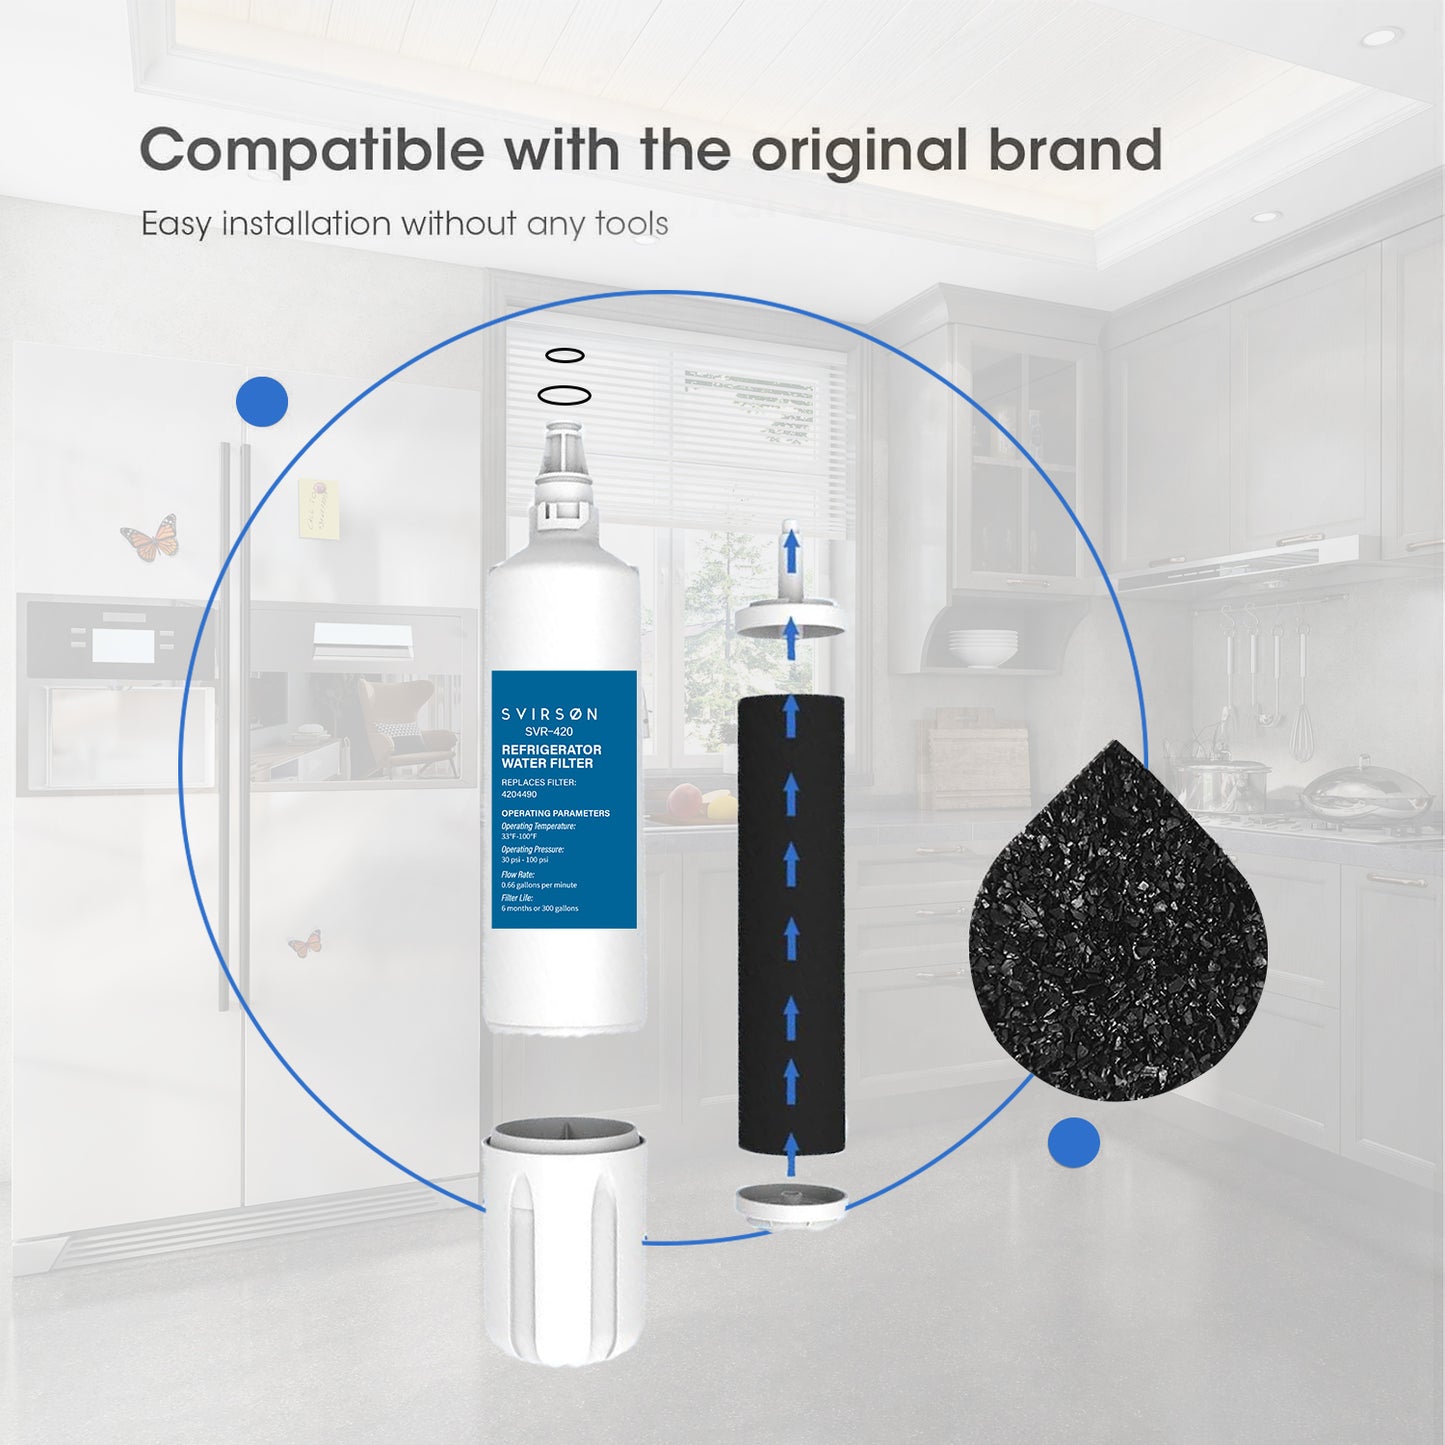 4204490 Water Filter & 7007067/7042798 Air Purification Cartridge Combo Pack - Compatible with Sub-Zero 4204490, 4290510 Refrigerator Water Filter, 7042798/7007067 Air filter.